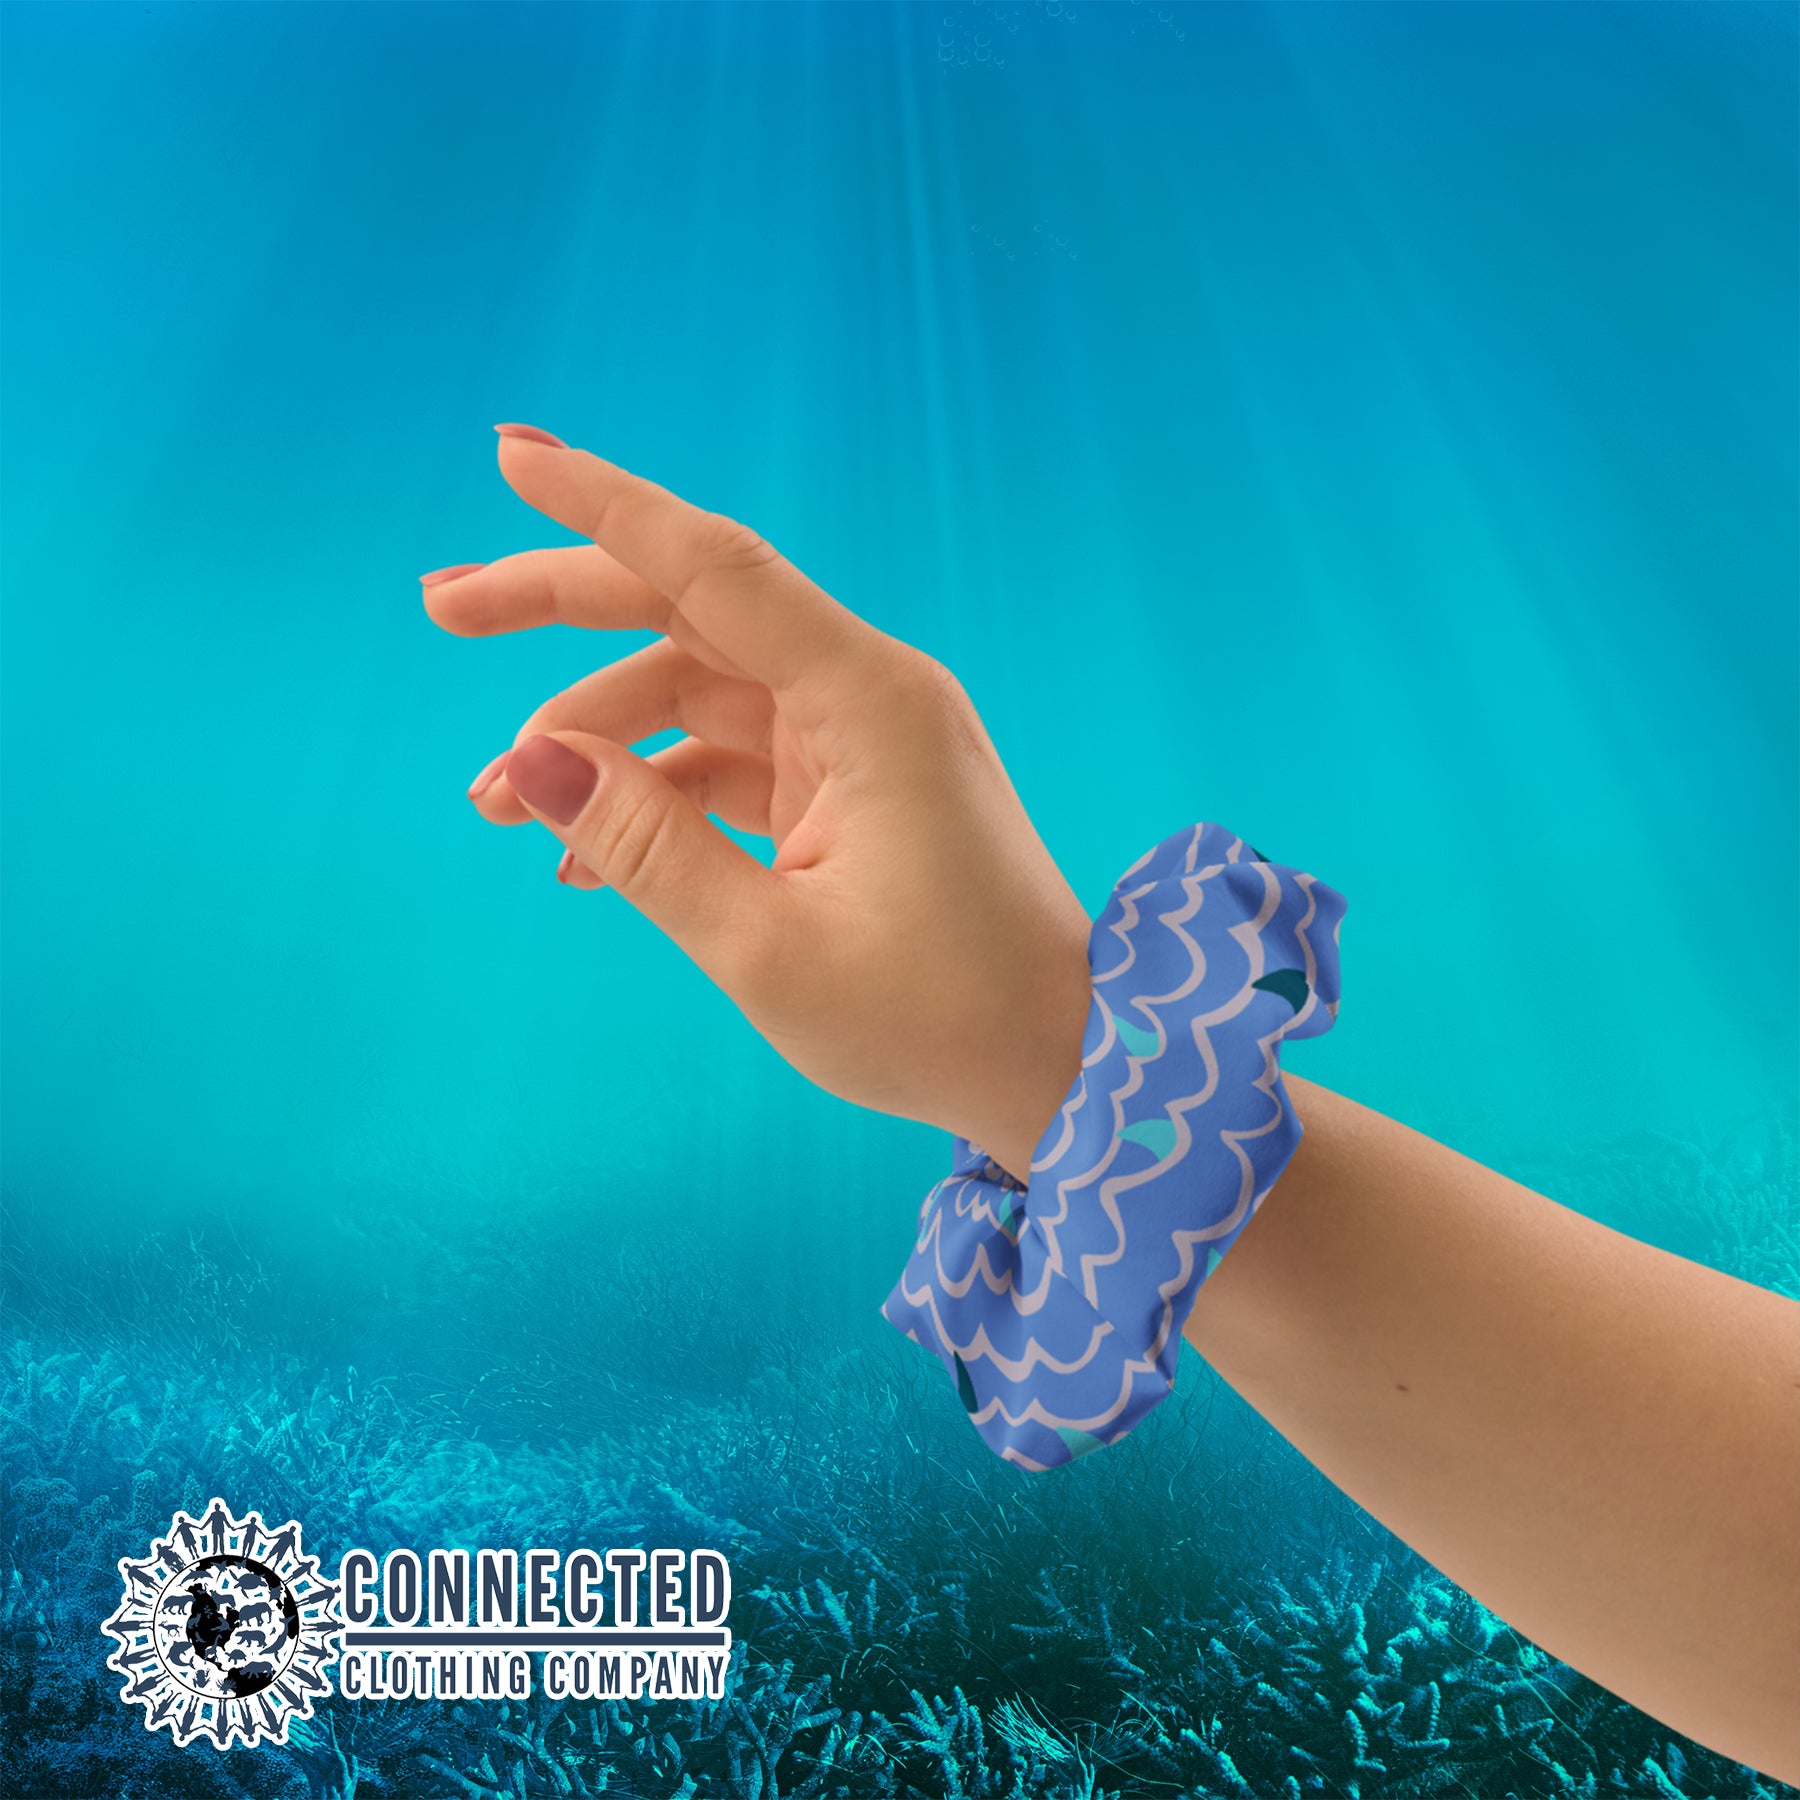 Shark Fin Scrunchie in Blue Color on Wrist - Connected Clothing Company - Ethical & Sustainable Apparel - 10% donated to save the sharks